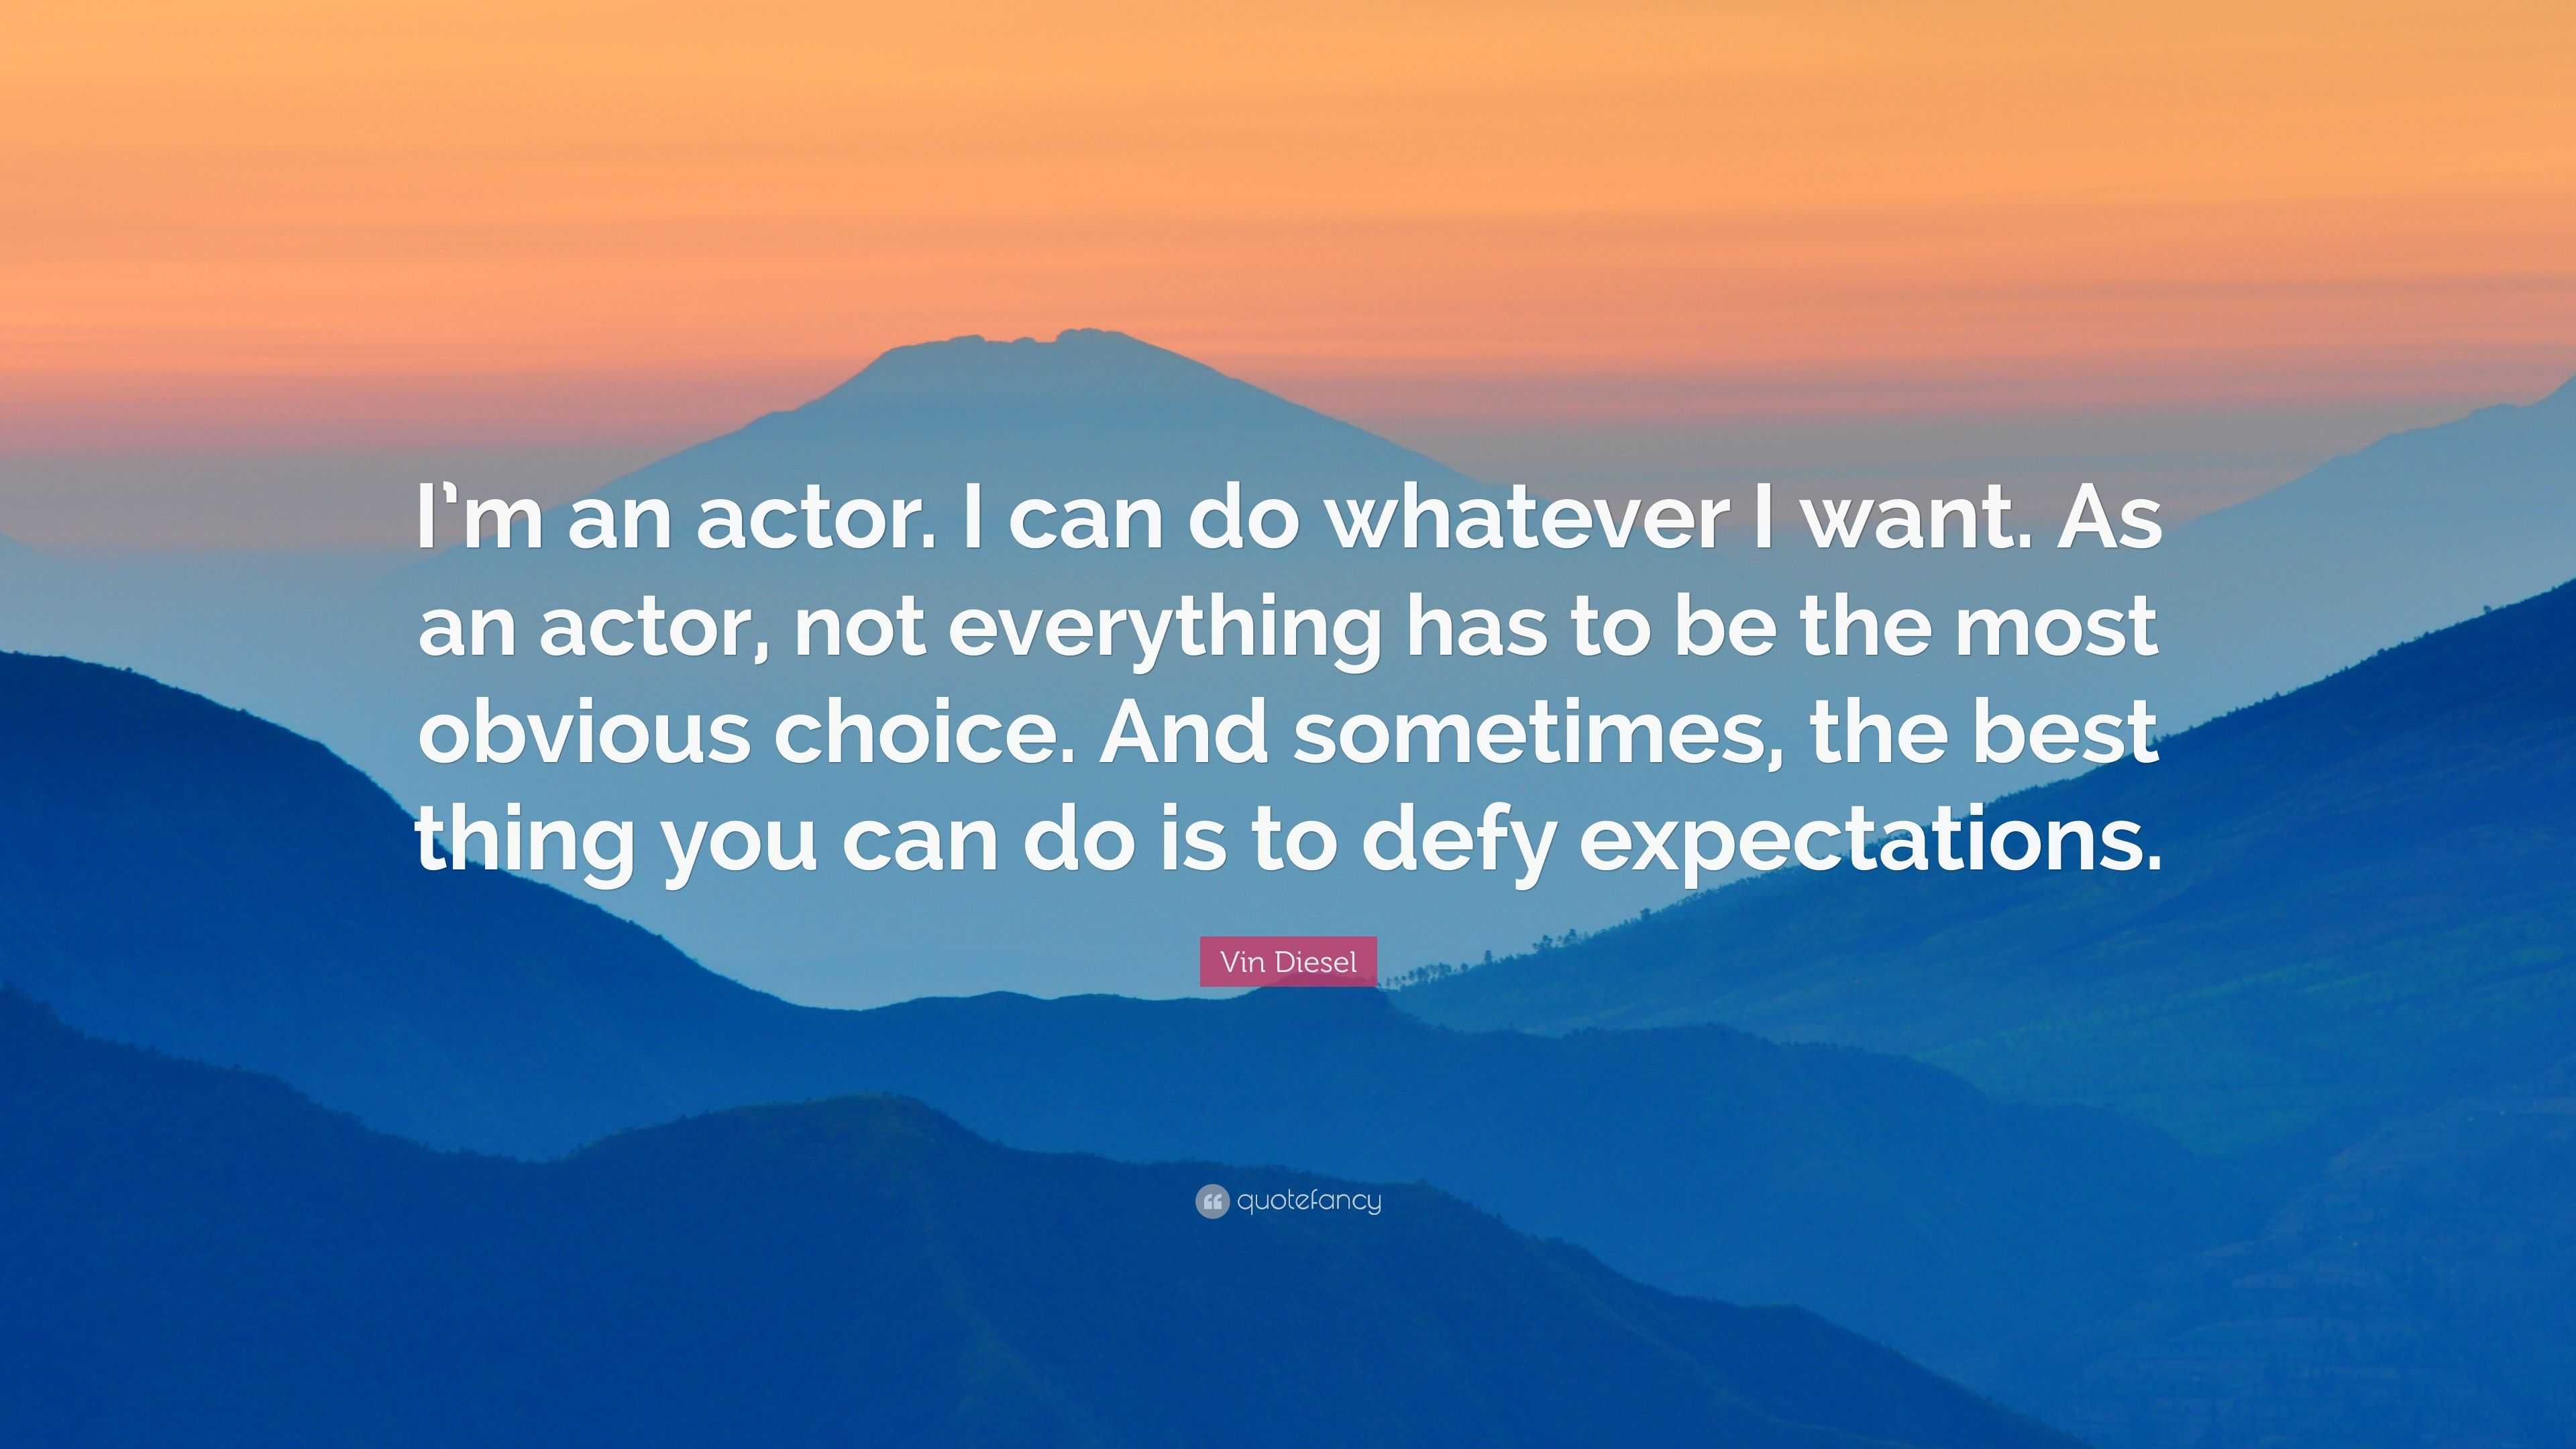 Vin Diesel Quote: “I'm an actor. I can do whatever I want. As an